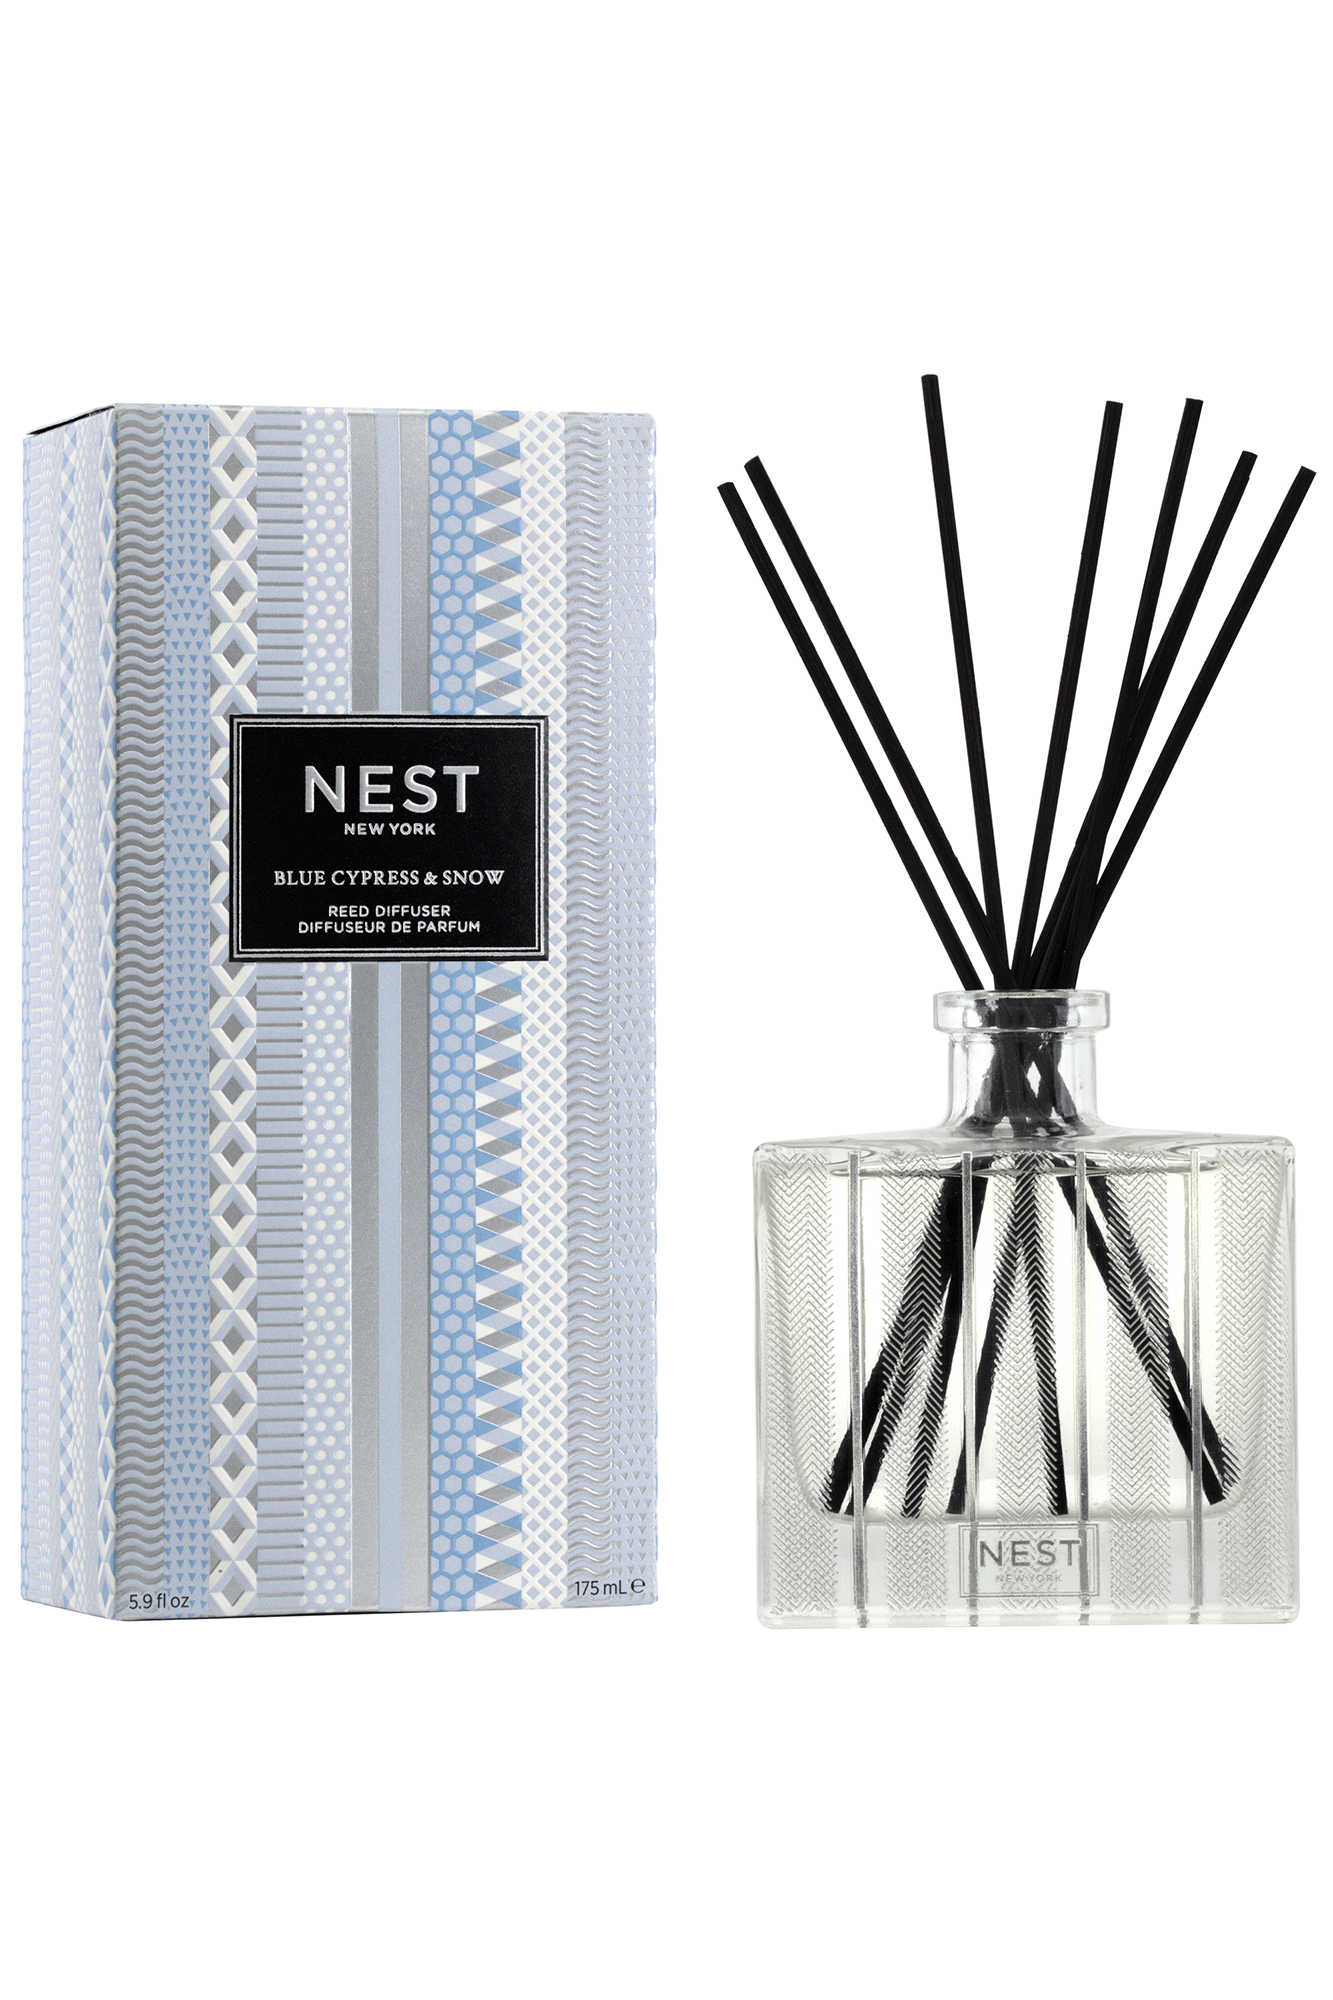 Infuse your home with the inviting aroma of a winter mountain retreat with the Blue Cypress & Snow Reed Diffuser from Nest. Enjoy the blend of crisp blue cypress, juniper berry, and subtle hints of smoked vanilla bean. Breathe in the natural wintery scents and create a comforting atmosphere in every room.